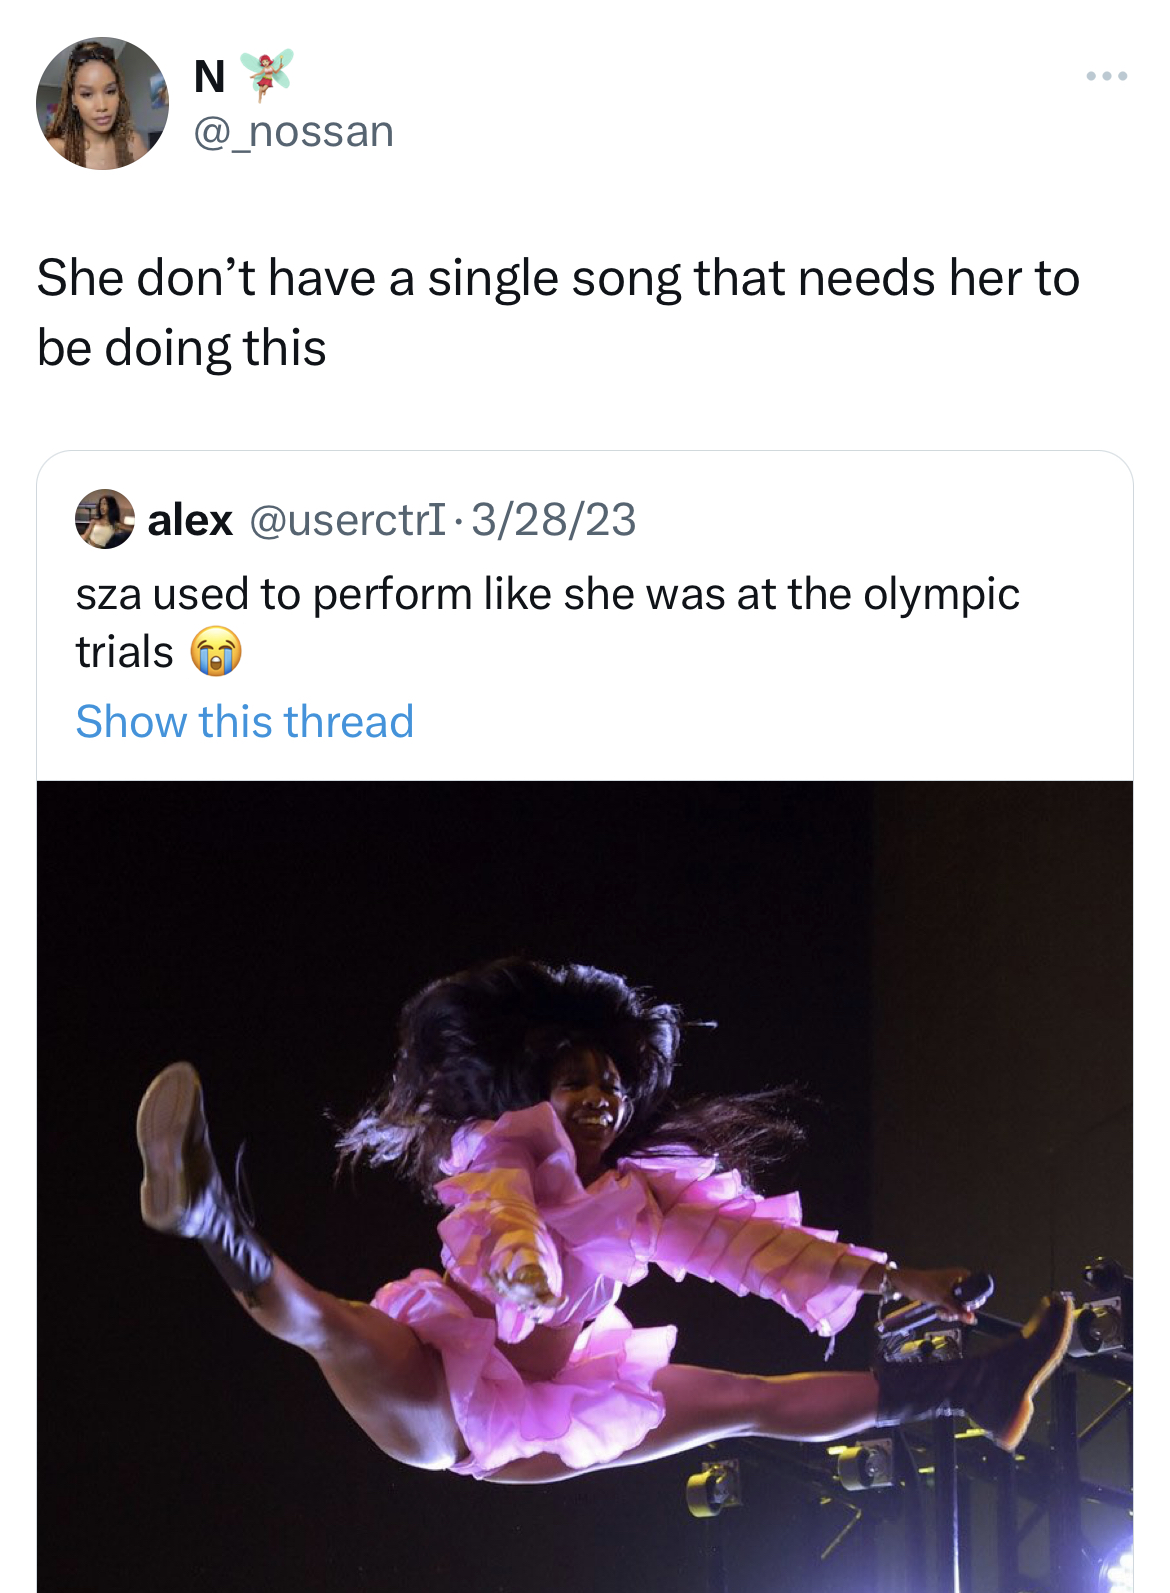 Don't have a single song where they need to do this - Coachella Valley Music and Arts Festival - N _nossan She don't have a single song that needs her to be doing this alex 32823 sza used to perform she was at the olympic trials Show this thread